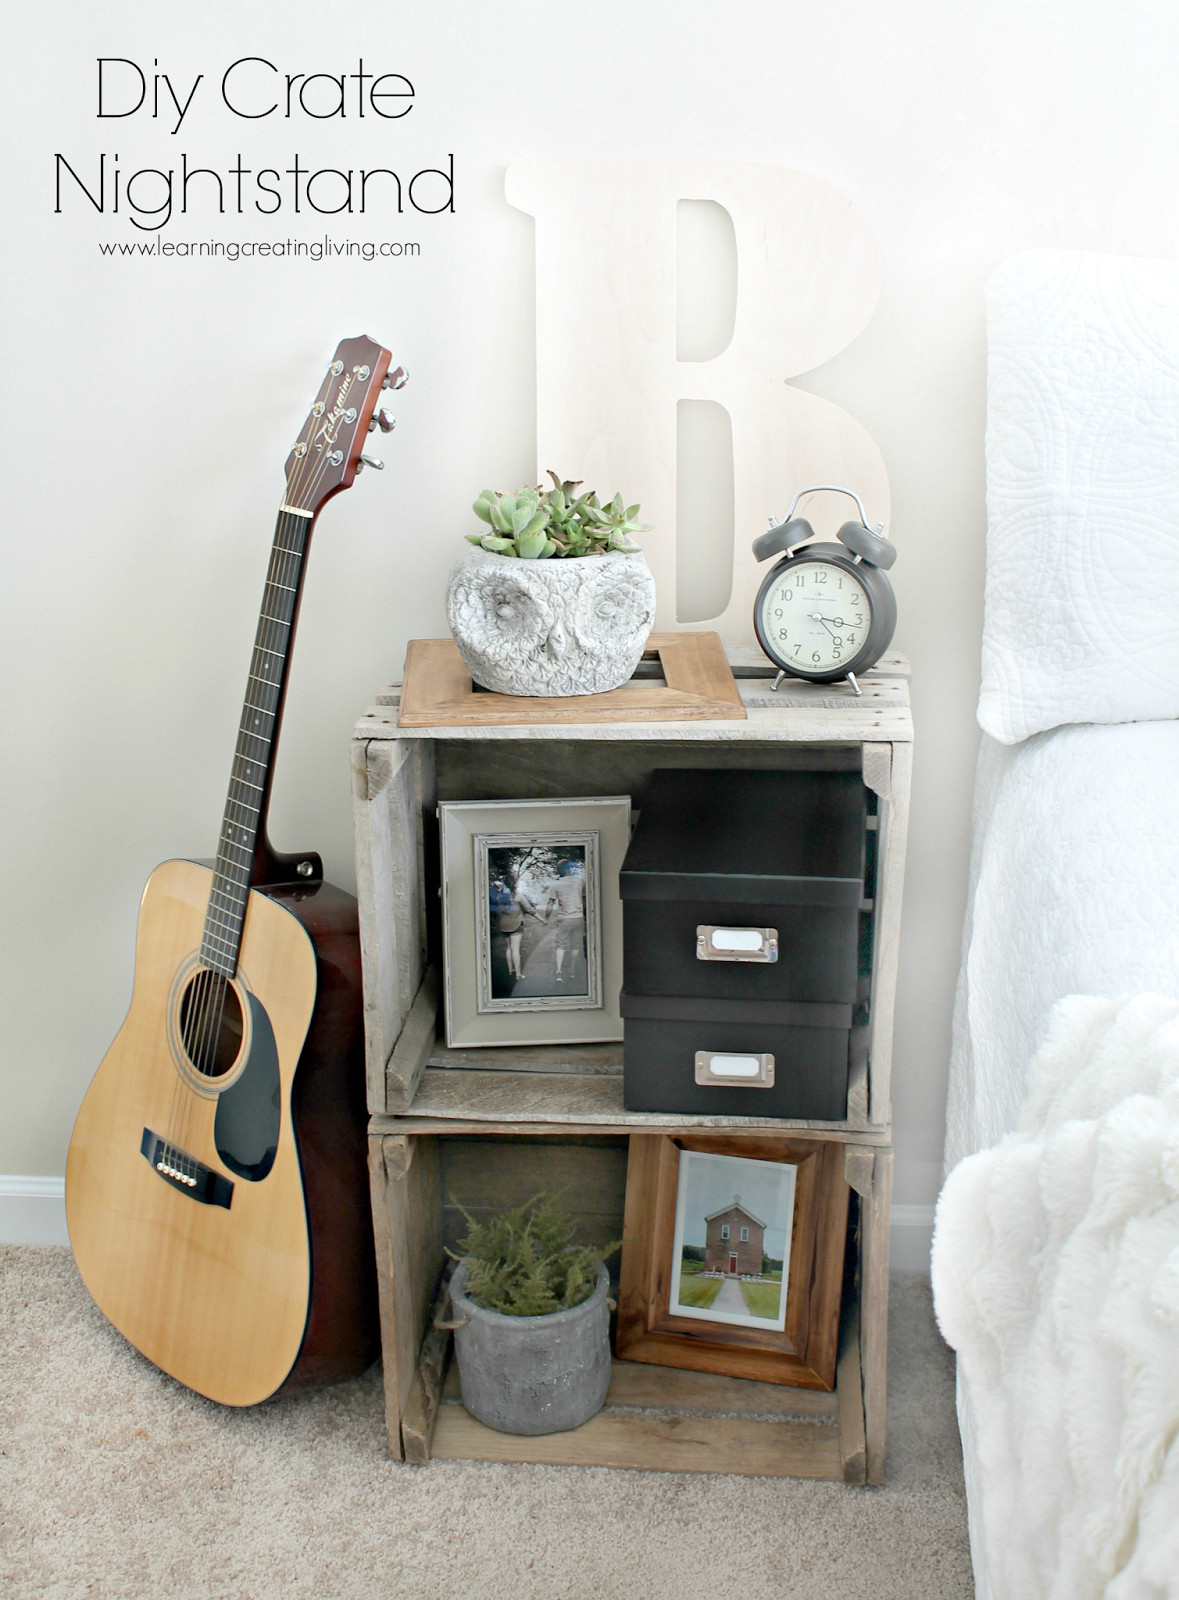 DIY Wooden Crate Projects
 5 DIY projects using wooden crates